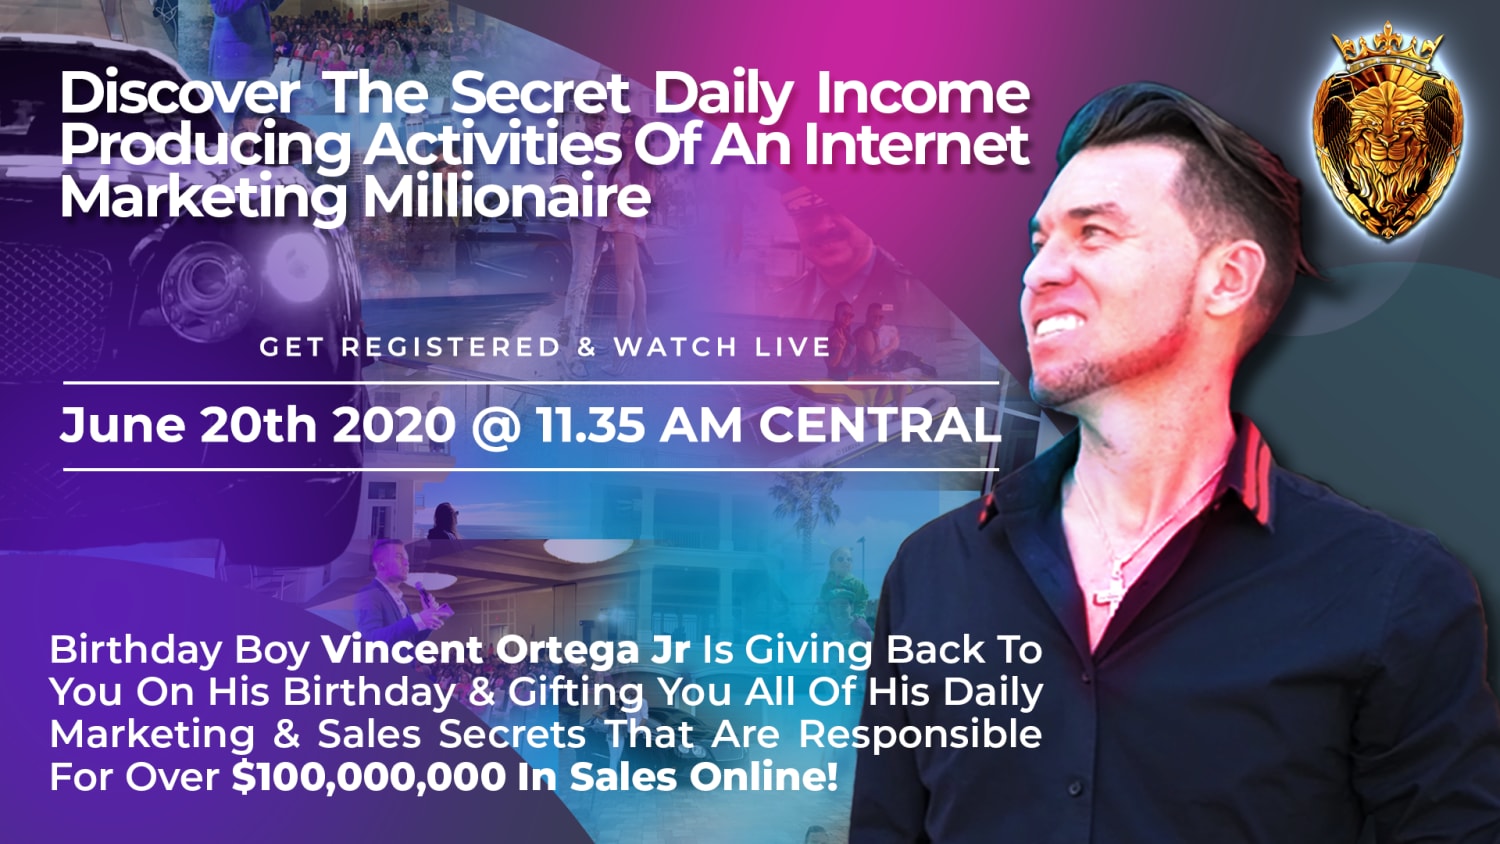 DISCOVER THE SECRETS OF A MILLIONAIRE ON HIS BIRTHDAY!